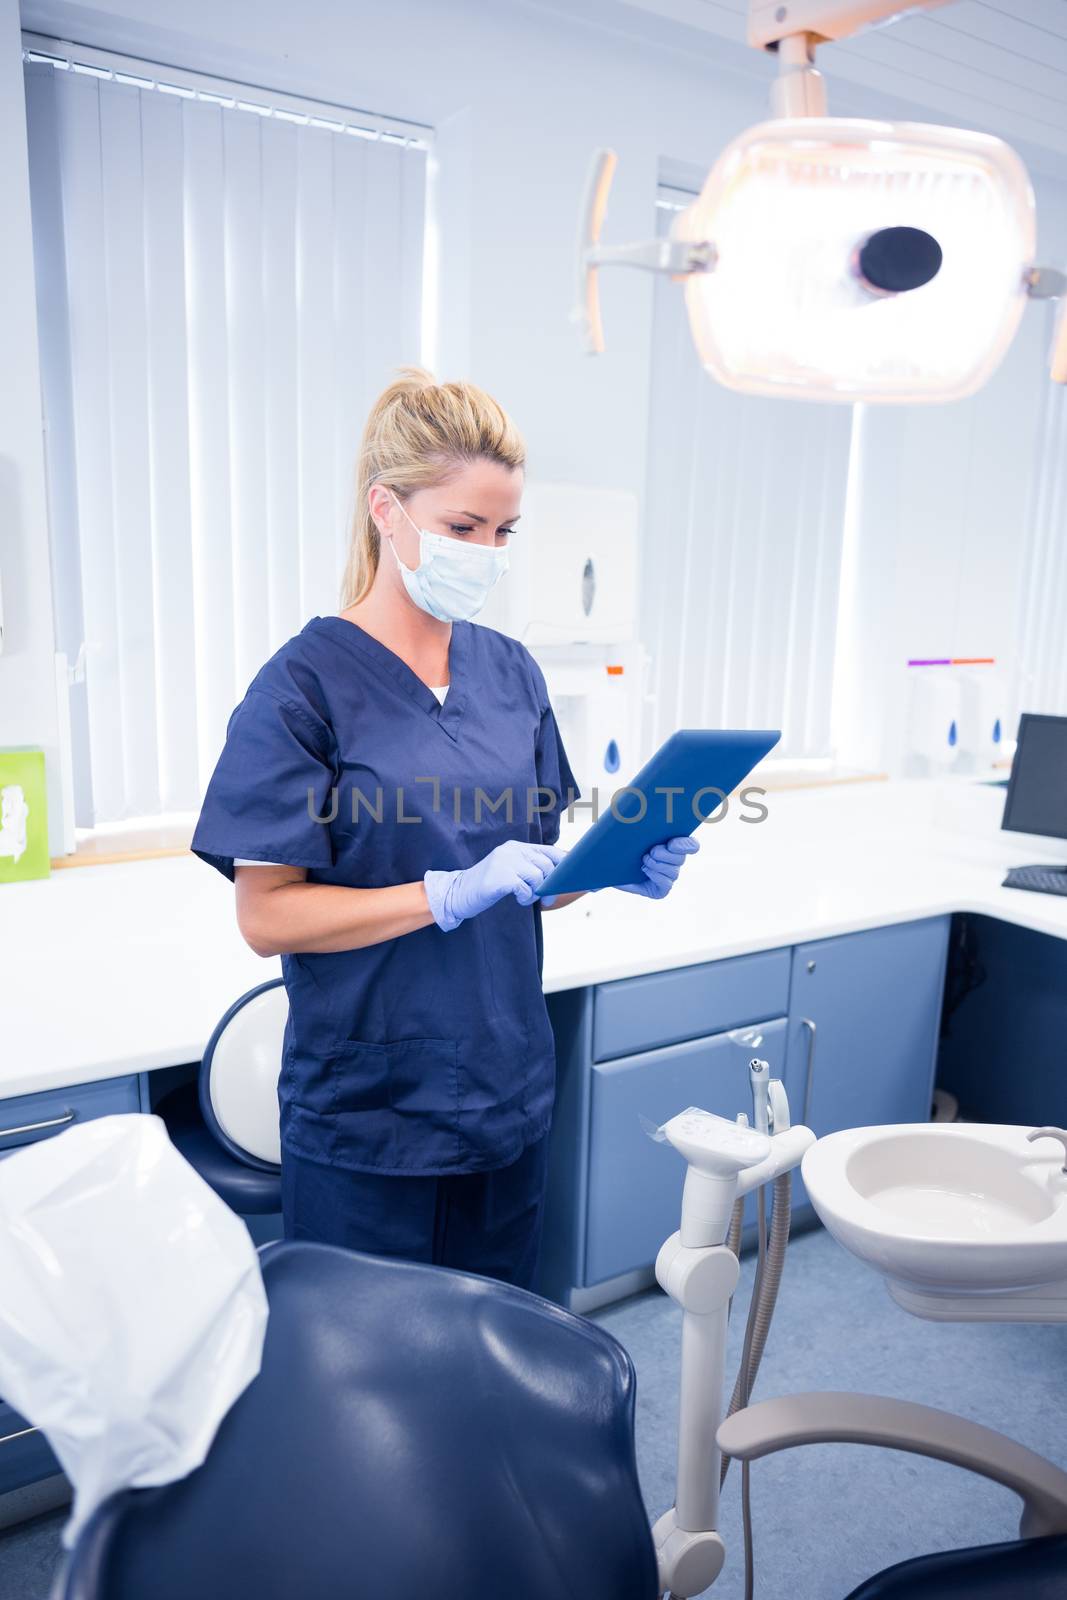 Dentist in mask and blue scrubs using her tablet at the dental clinic